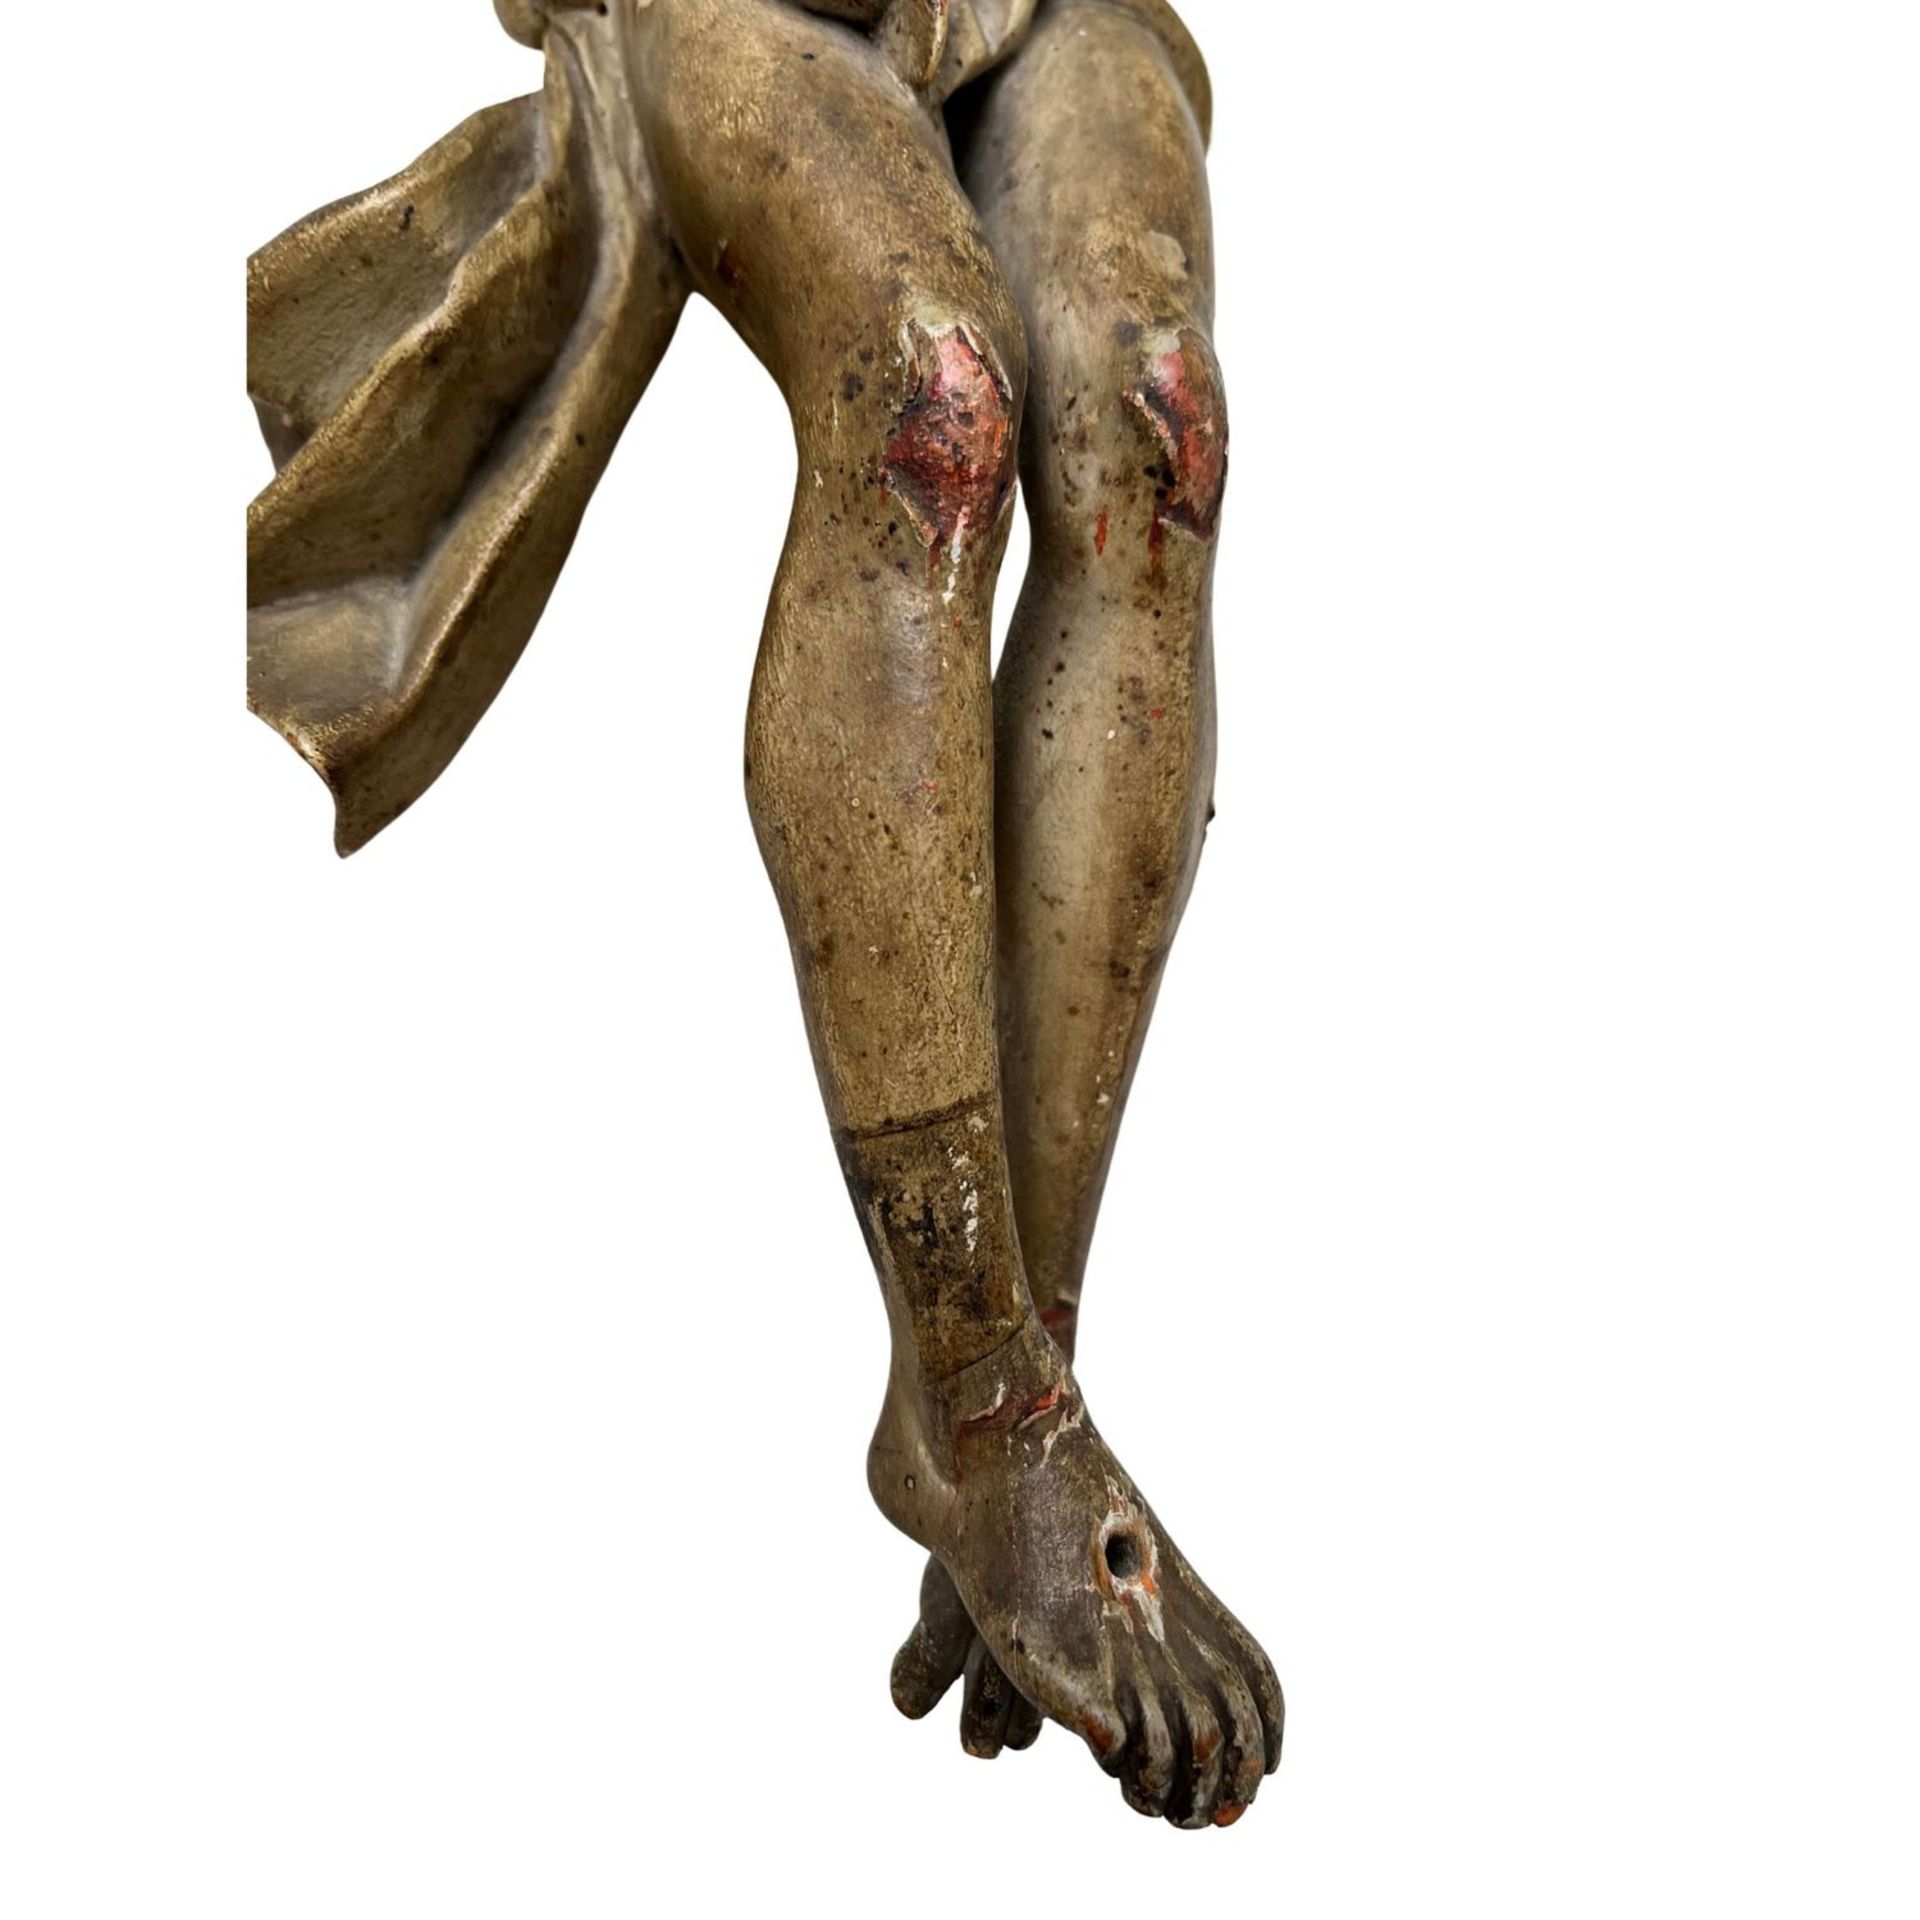 Christ without arms - Image 2 of 5